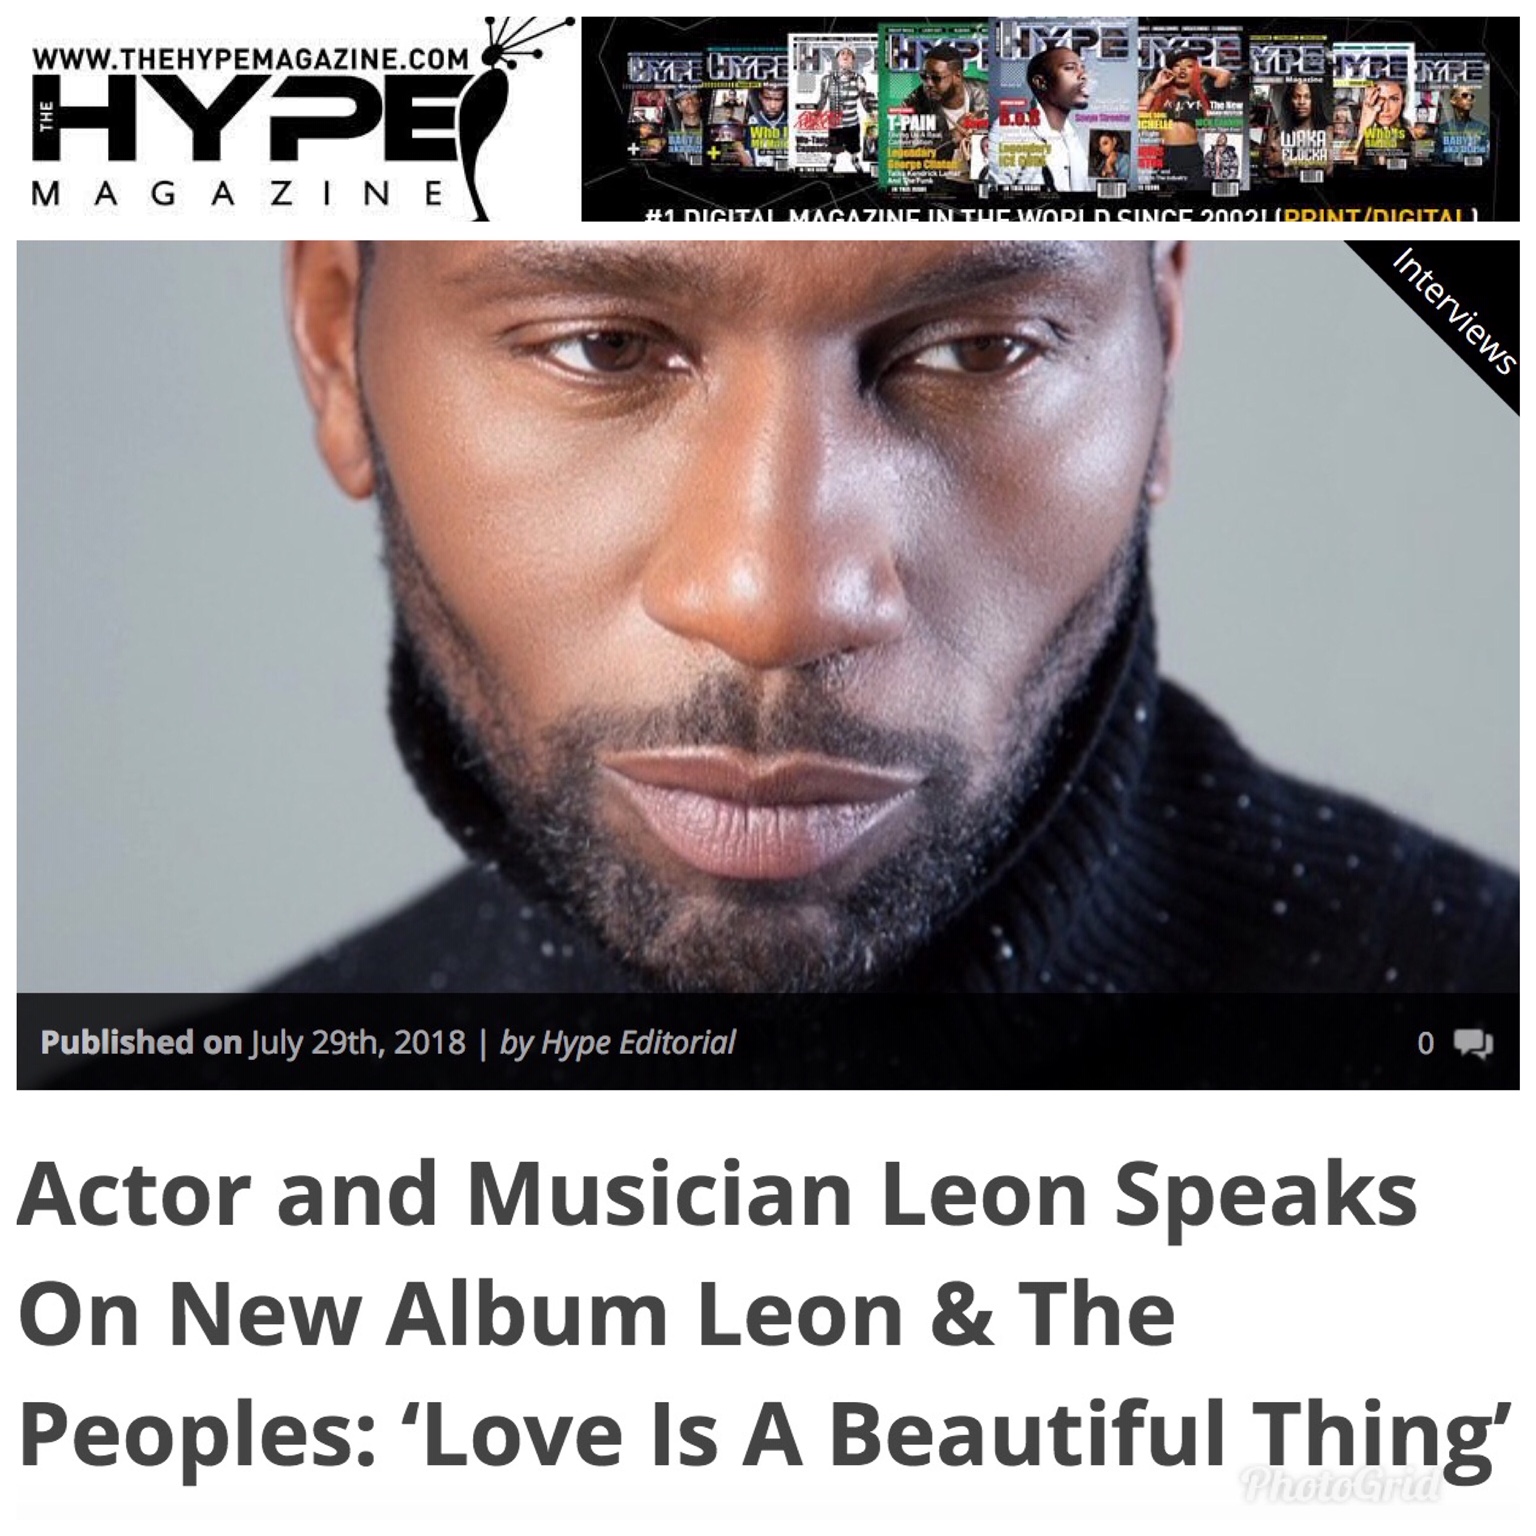 HYPE Magazine - Artist Interview  
LEON of Leon & The Peoples